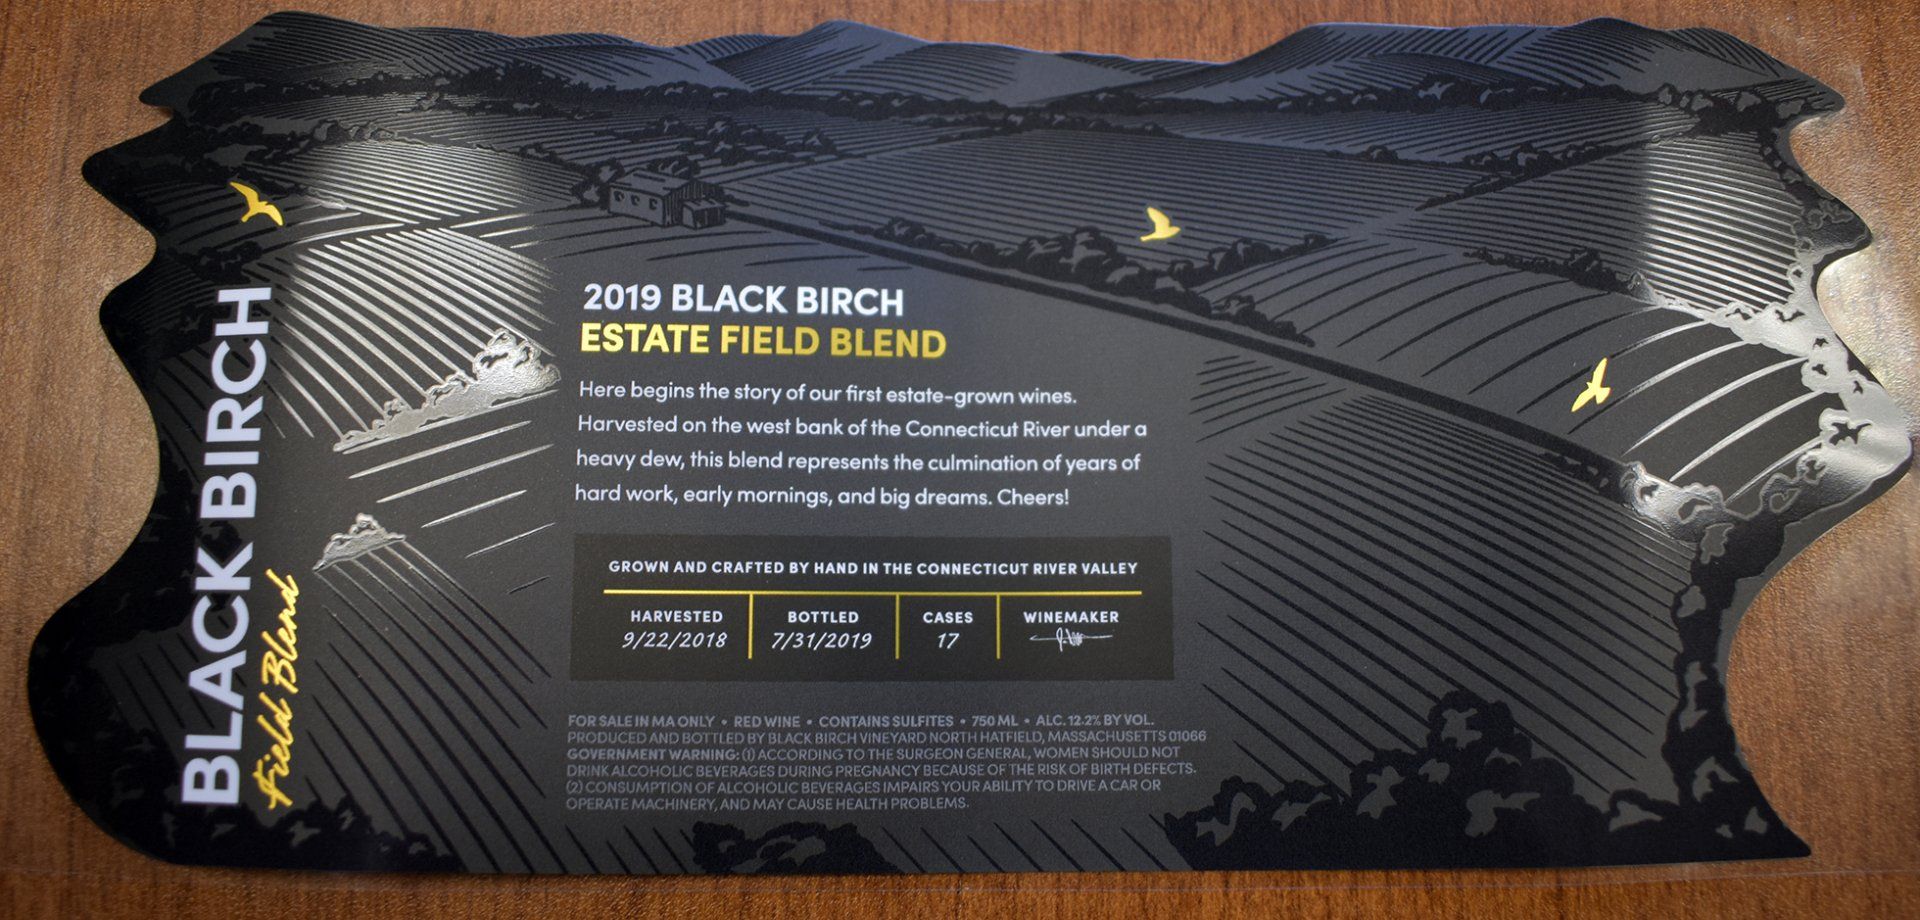 Black Birch Vineyard's 2019 Estate Field Blend label with selective gloss varnish and specialty die cut